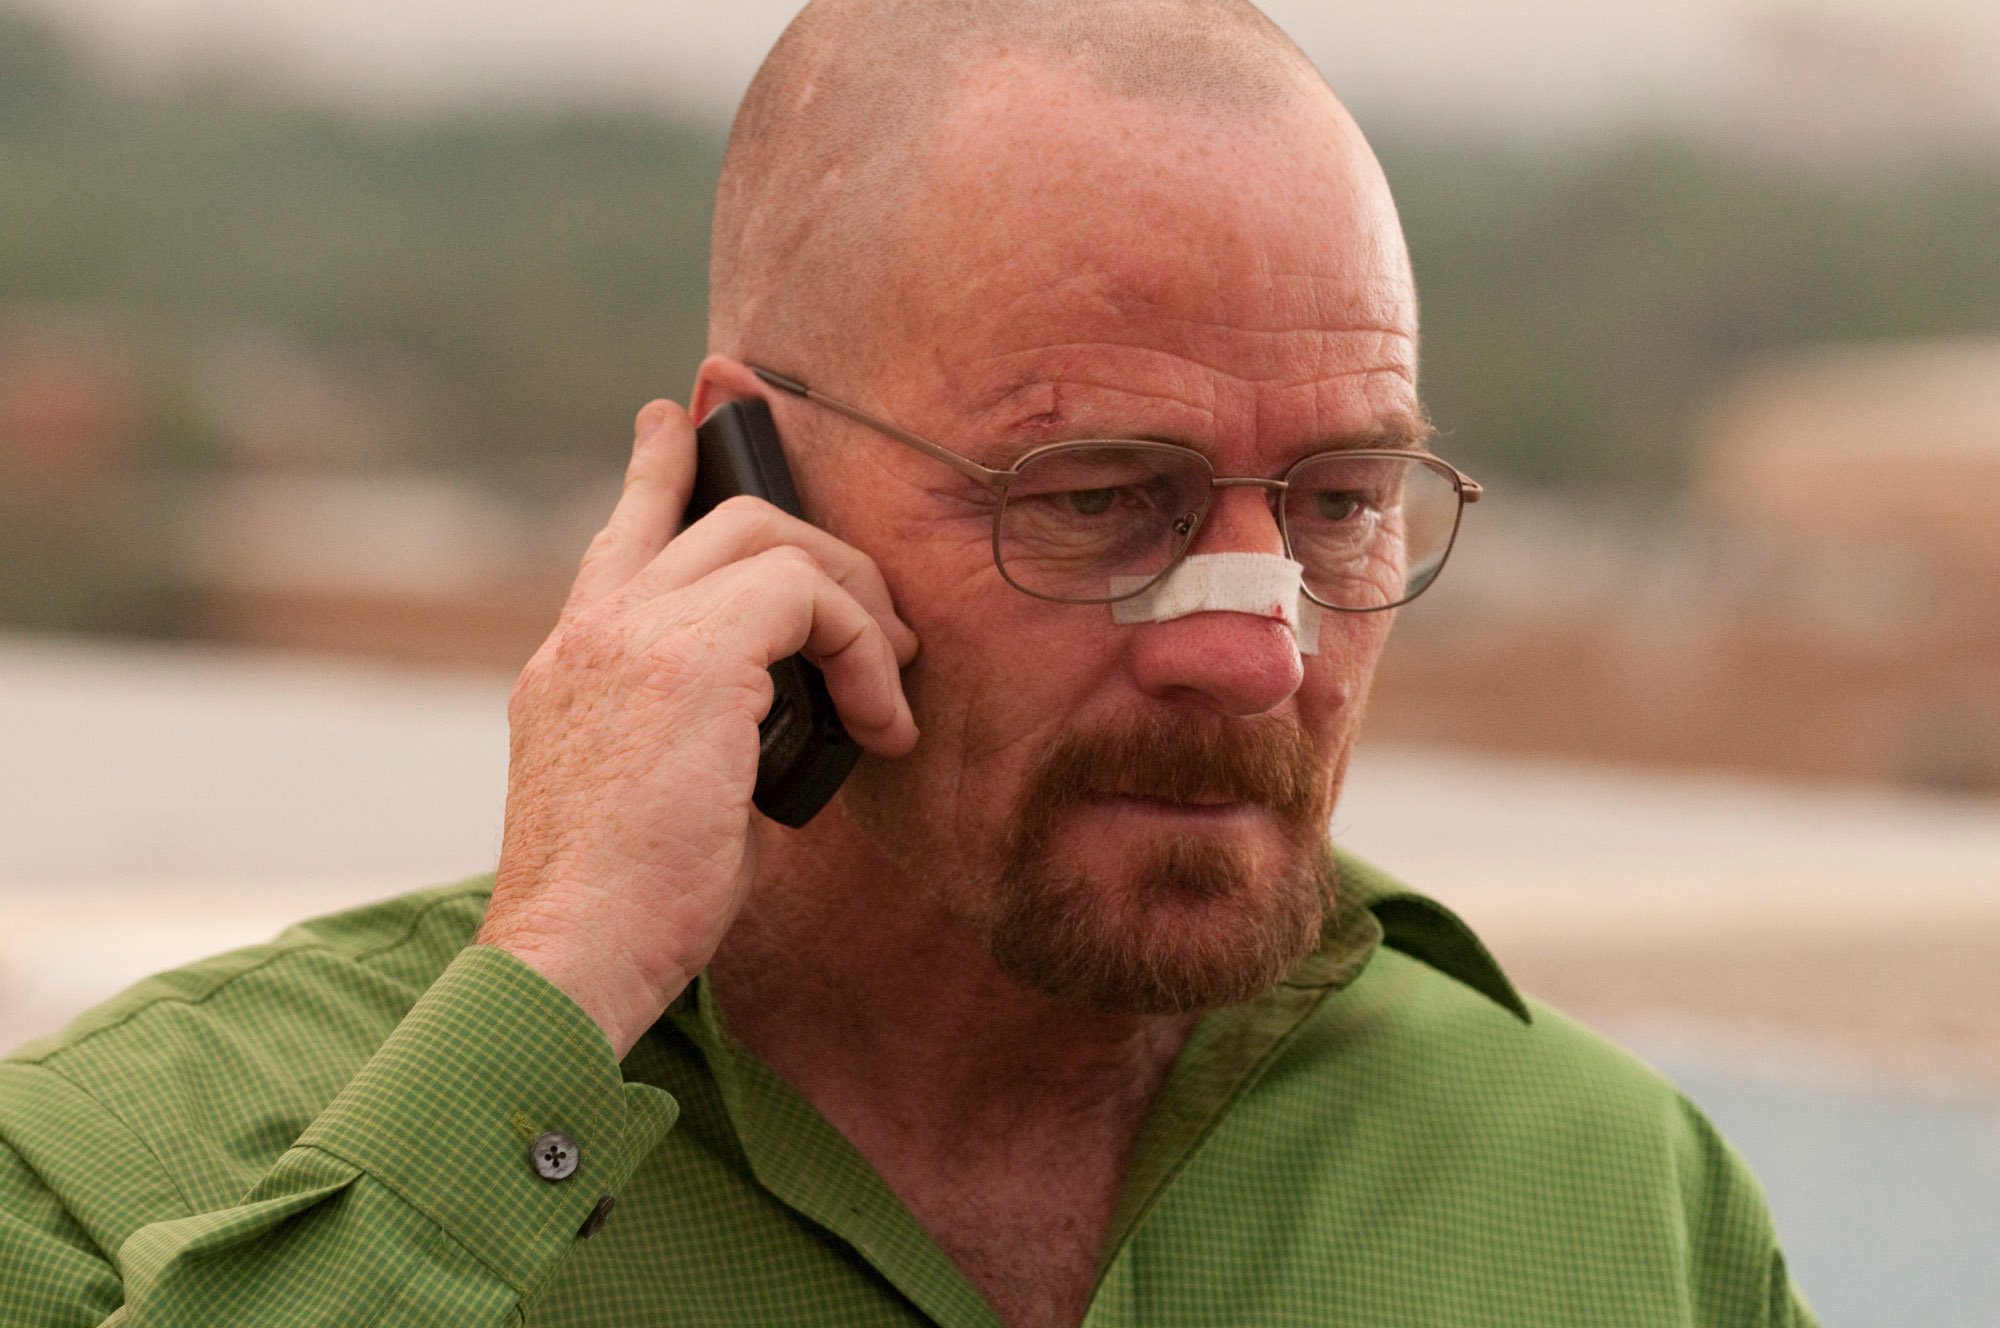 Walter White in 'Breaking Bad' Season 4. He's wearing a green shirt, has a bandaid over his nose, and is talking on the phone.